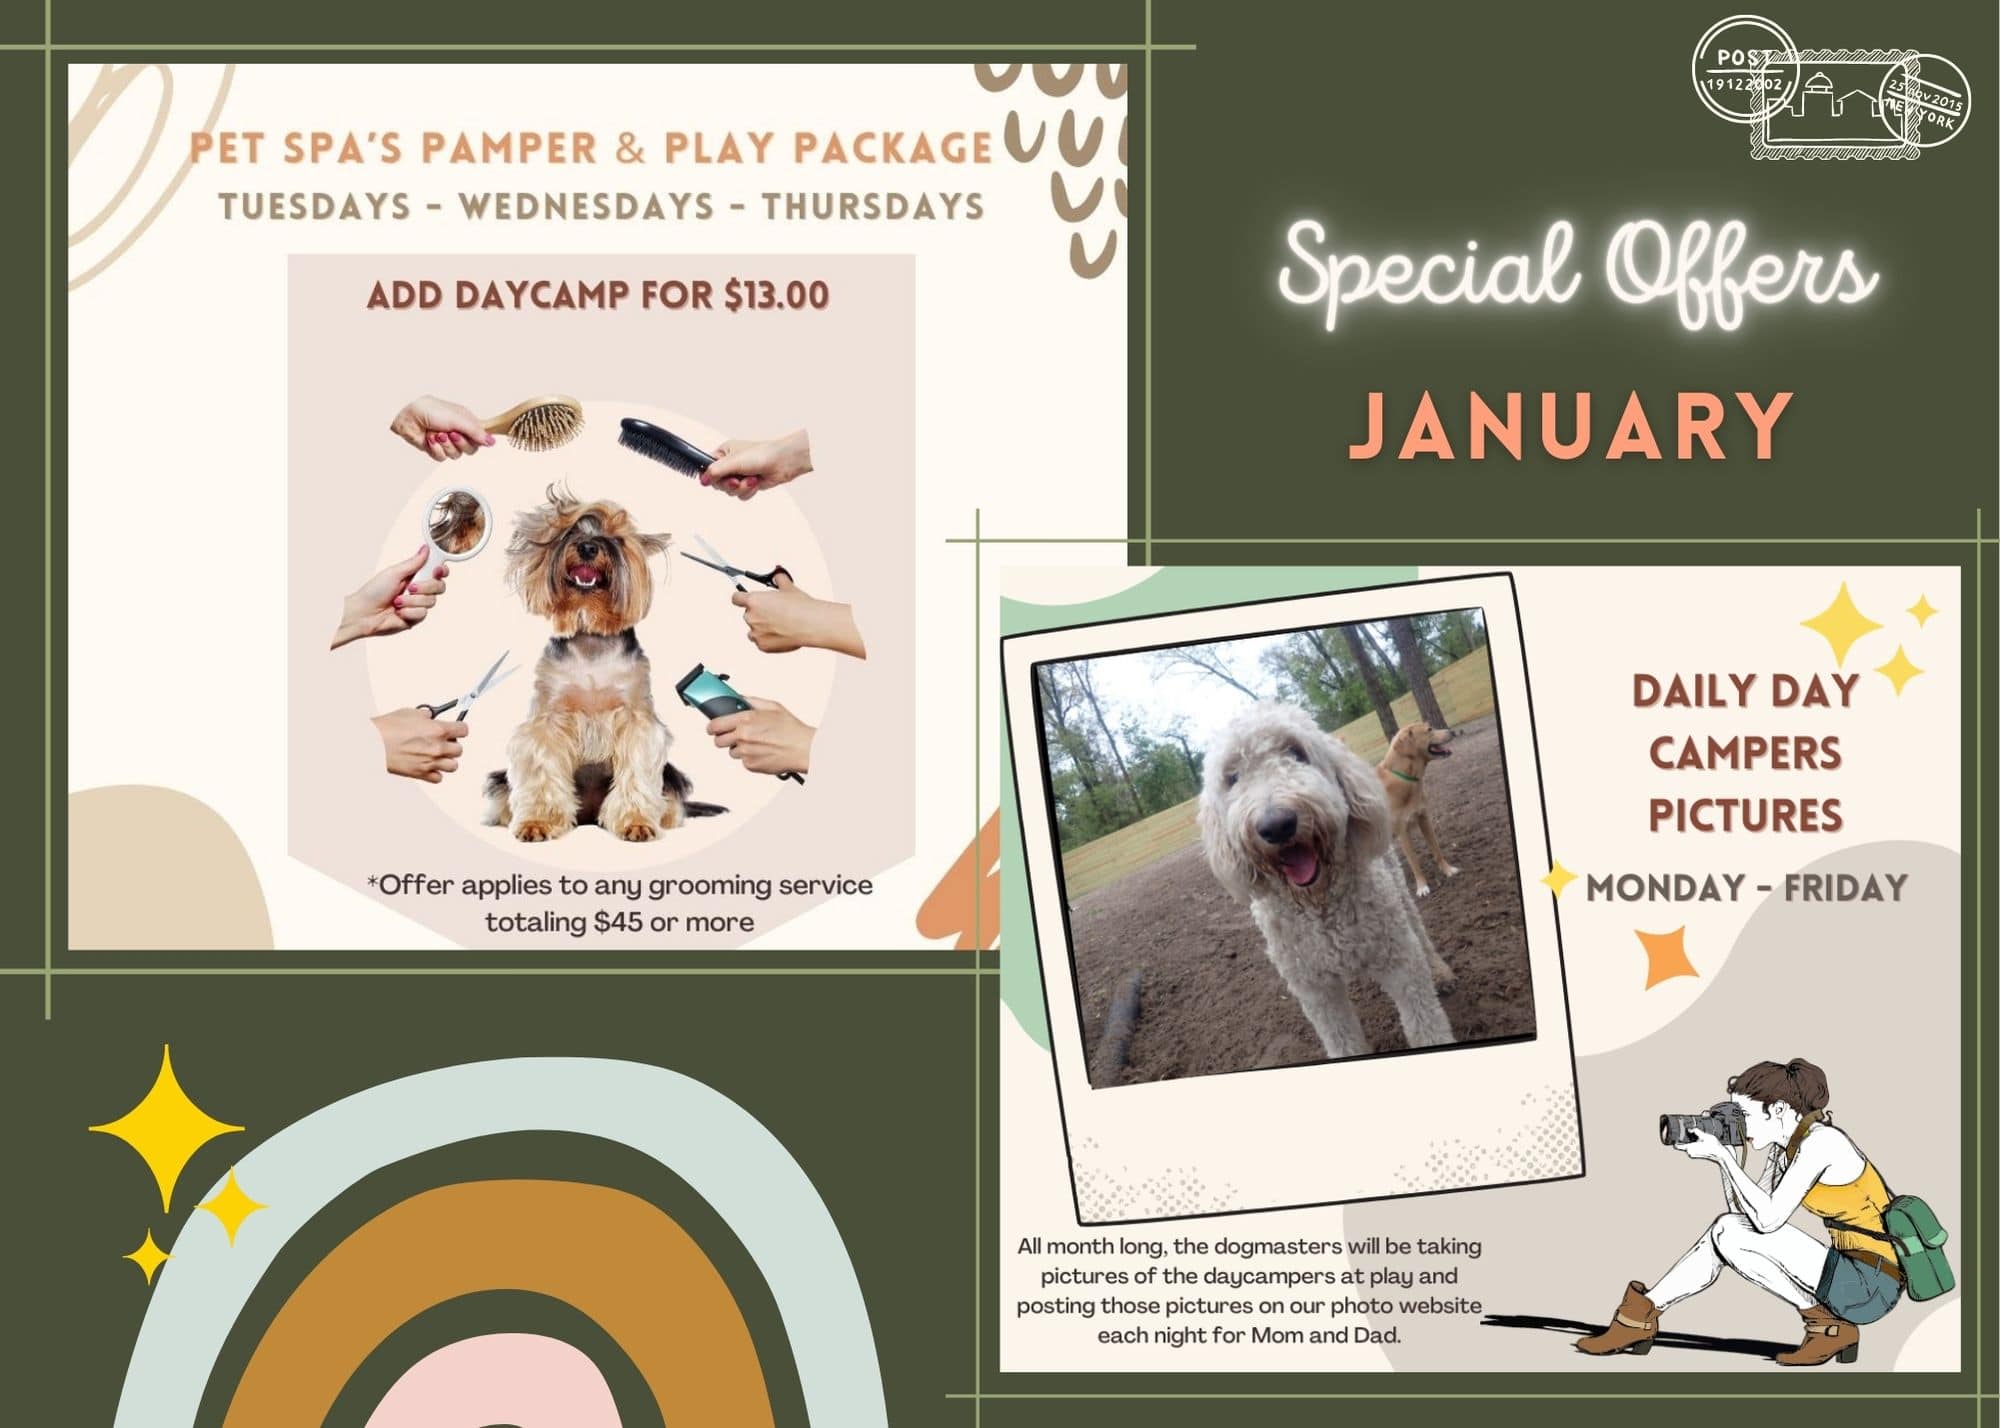 Pet Spa and Daycamp Specials